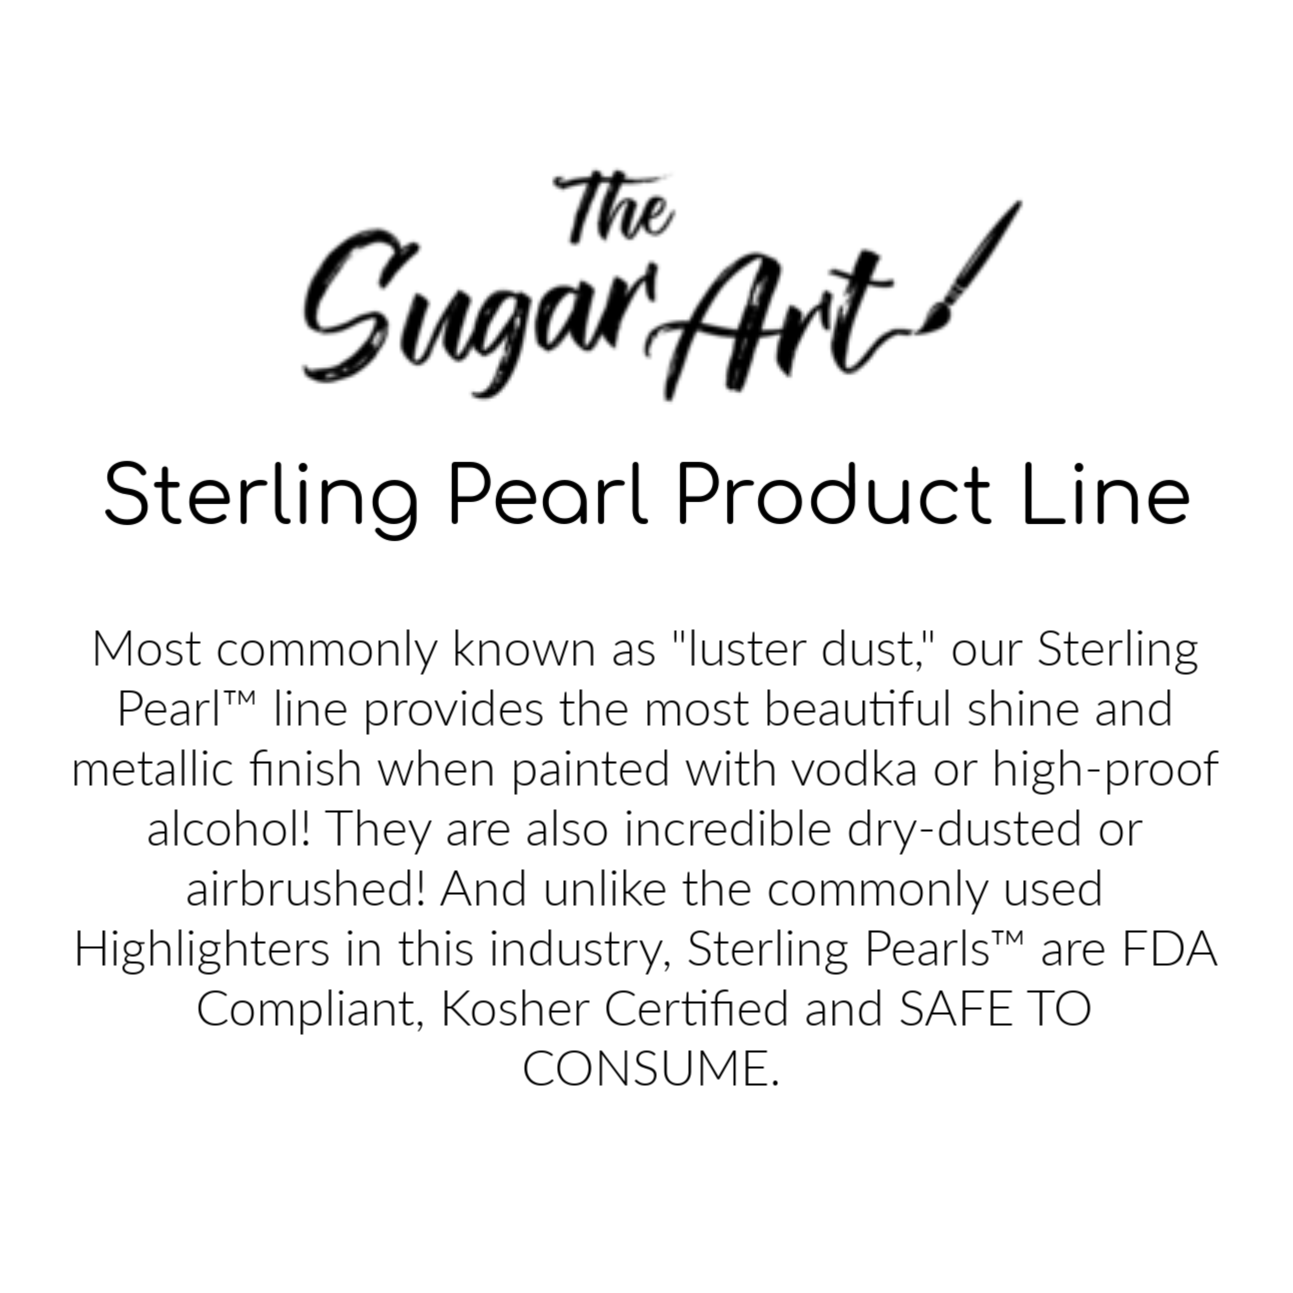 The Sugar Art Sterling Pearl info graphic